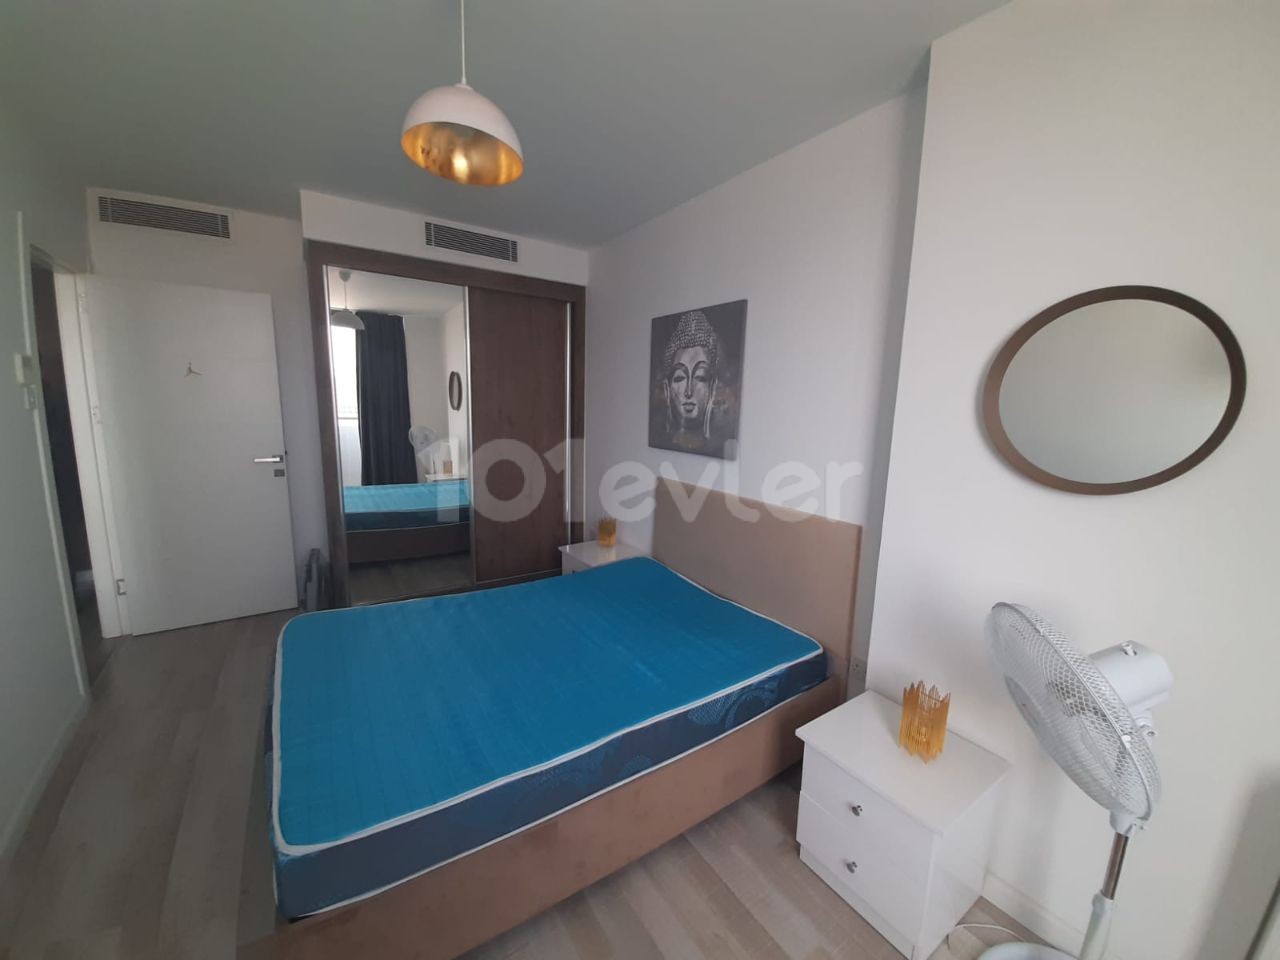  Premier 1+1 rent house from  450$ 6 months pay  Apartman charge 42£ deposıt and commıssıon